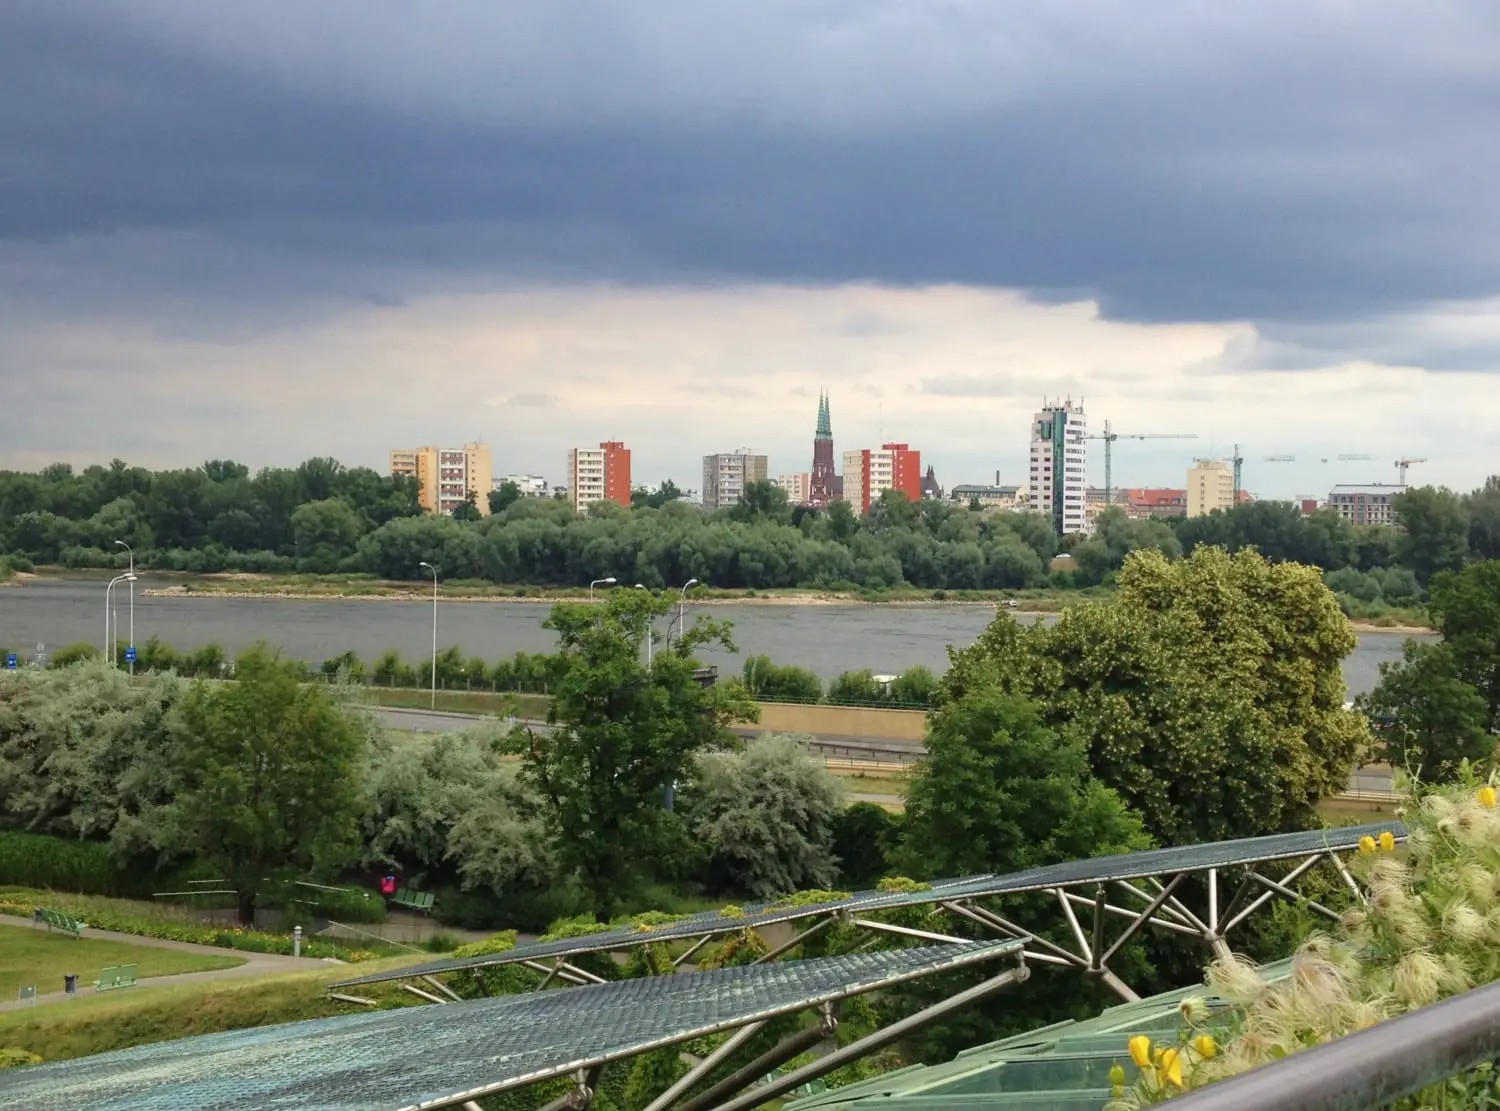 From the library's green roof, one can see across the river to Praga and the solar panels surrounding the building